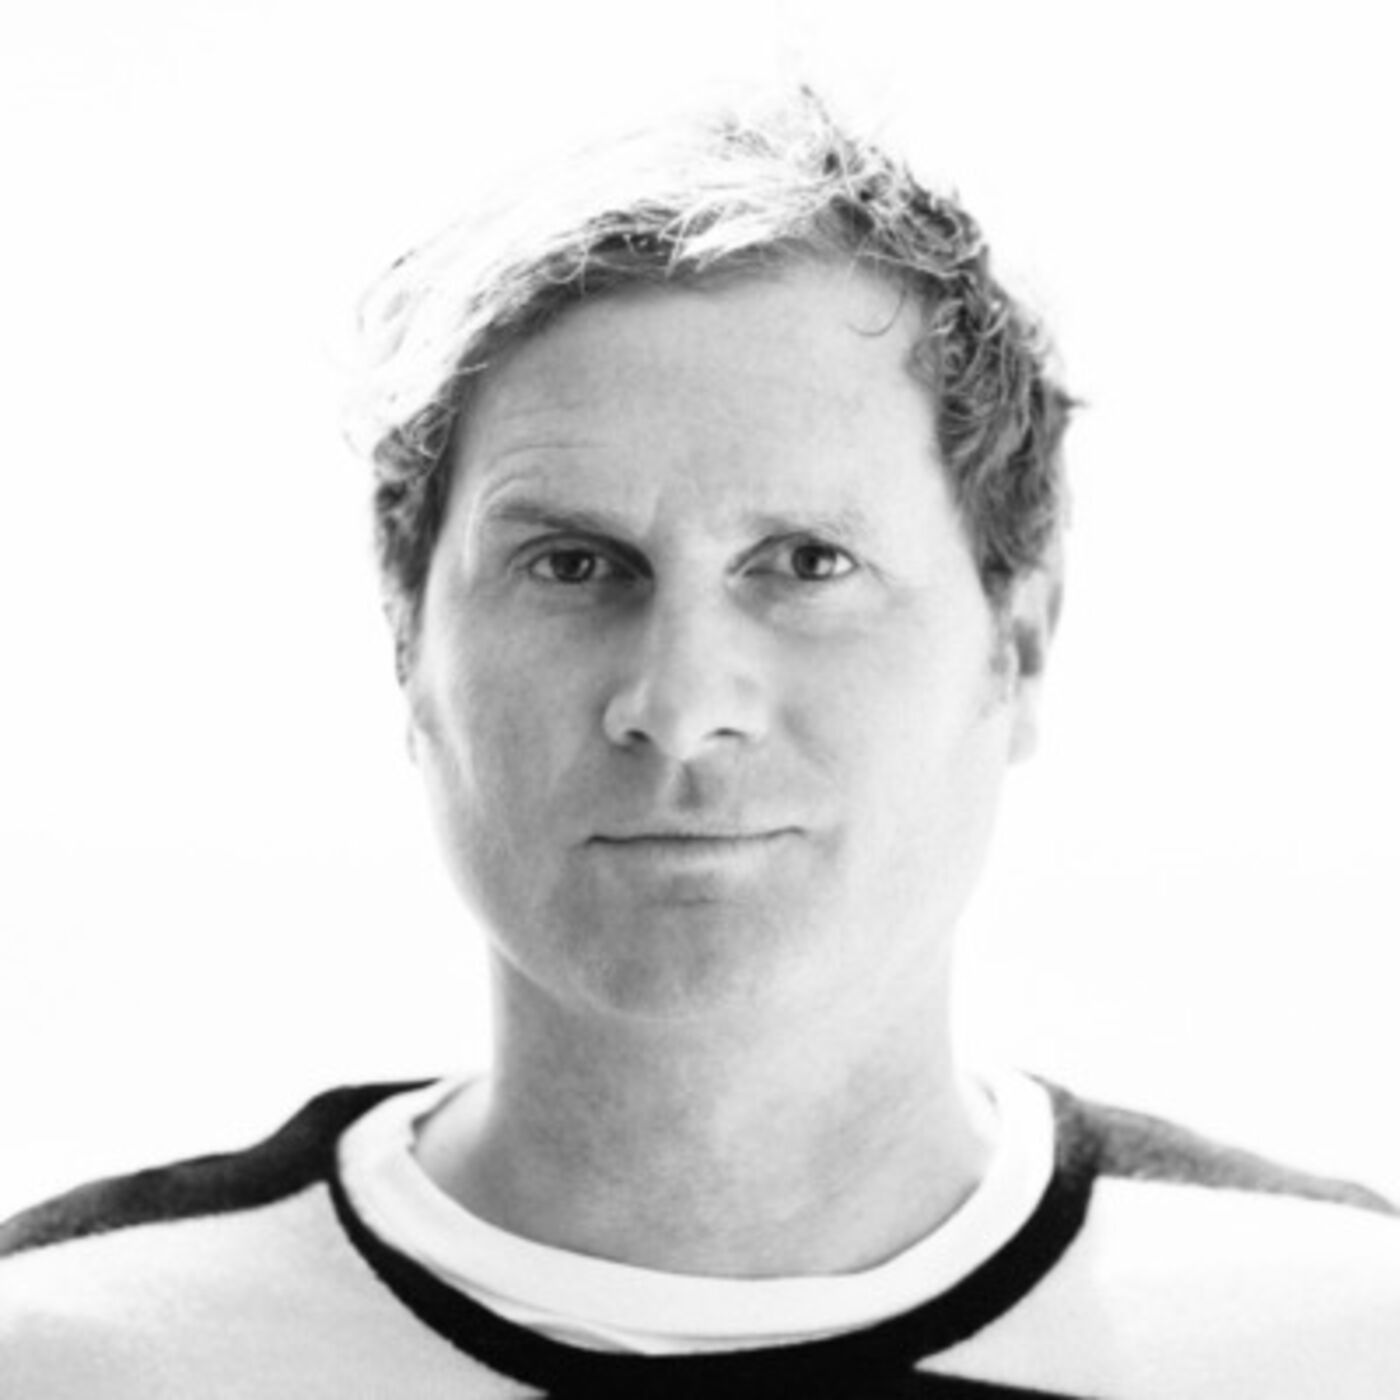 How to Ditch the Saviour Complex and Feel More Alive with Rob Bell